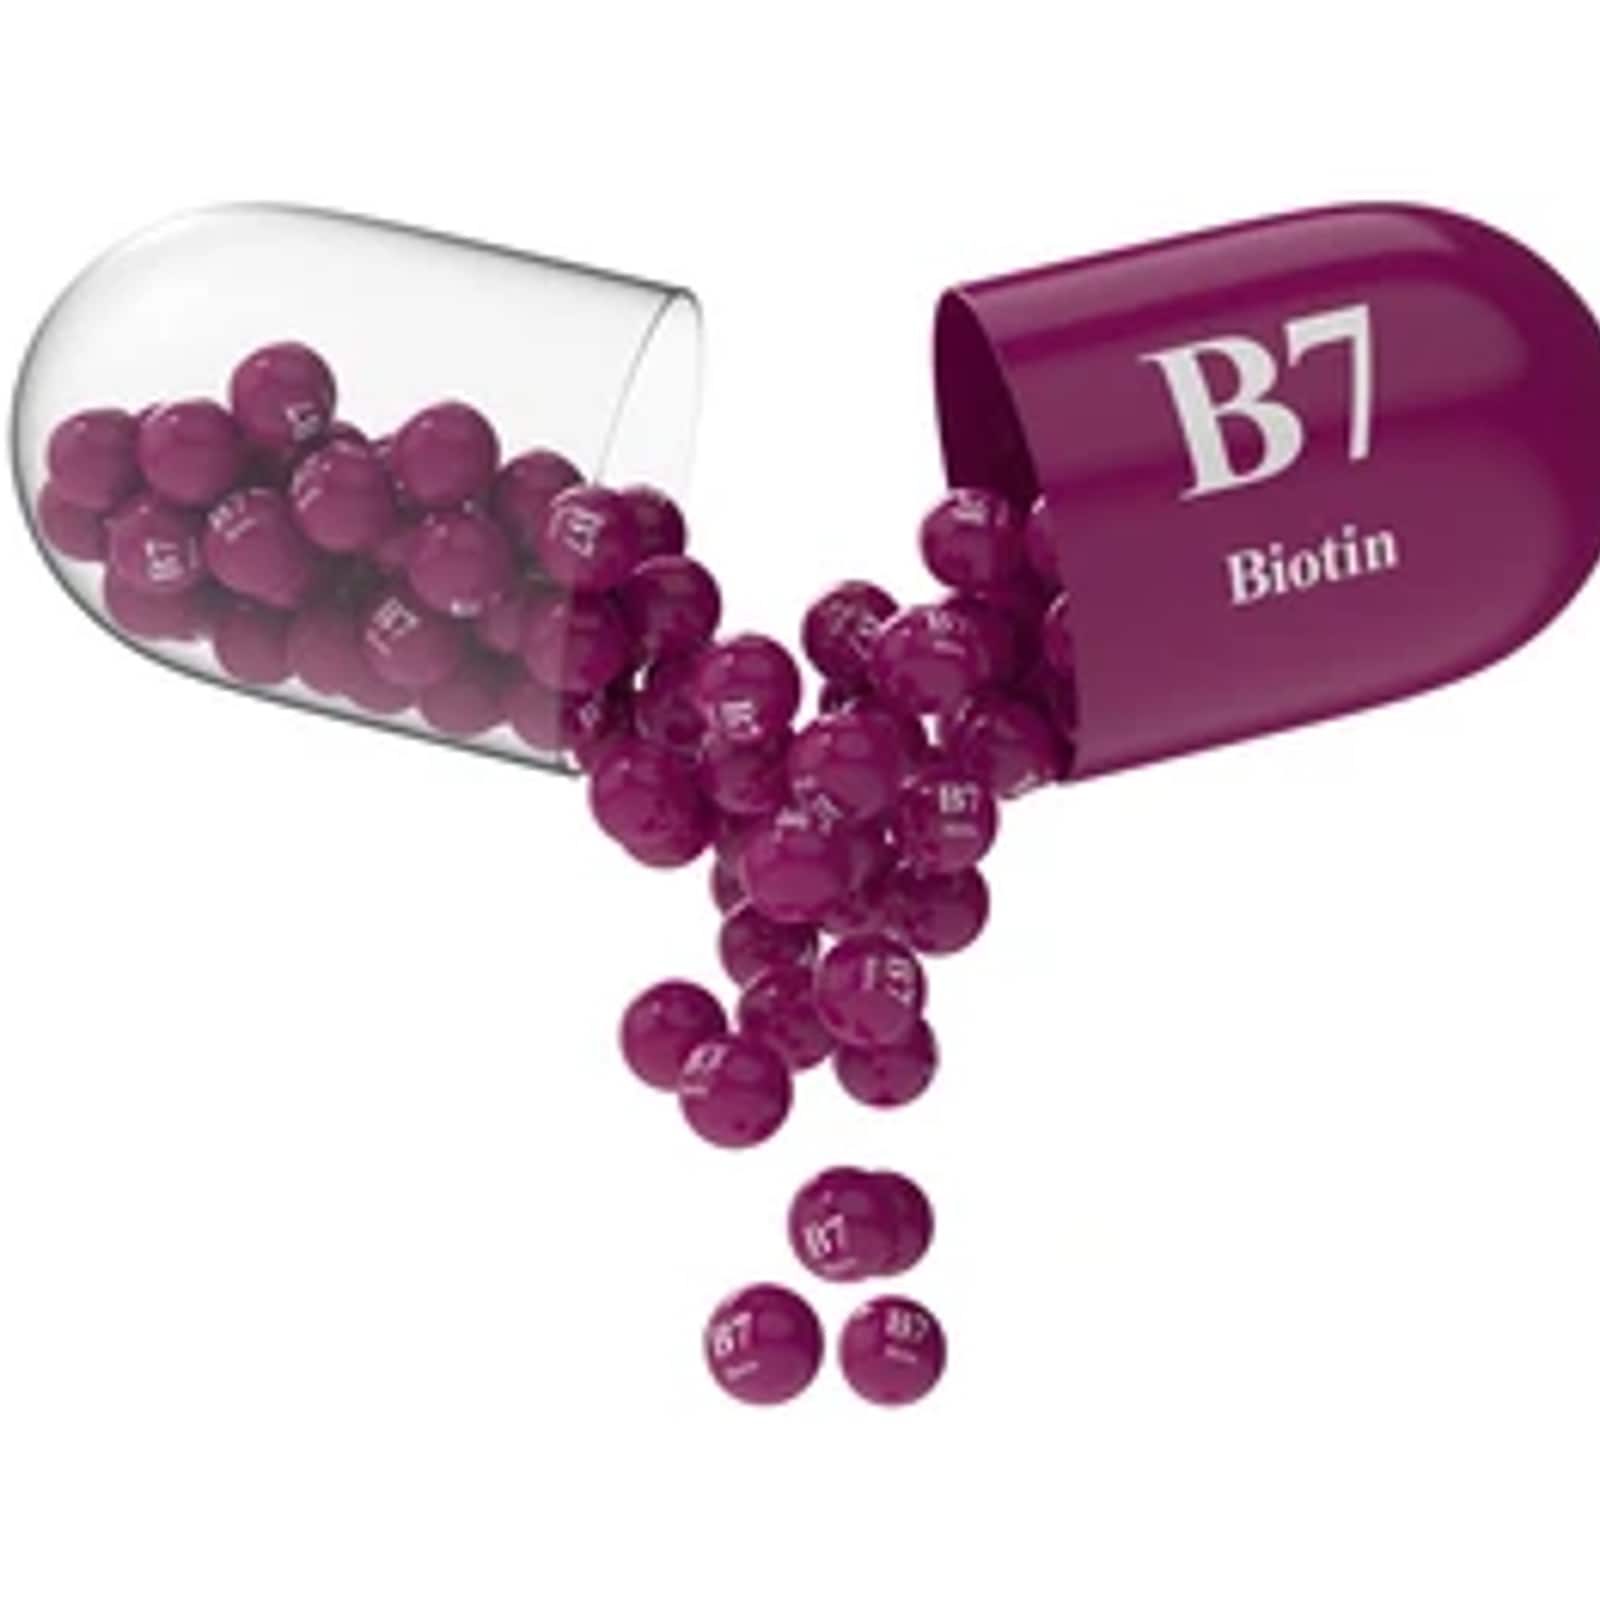 Is Biotin Really Beneficial for Your Hair? Find Out